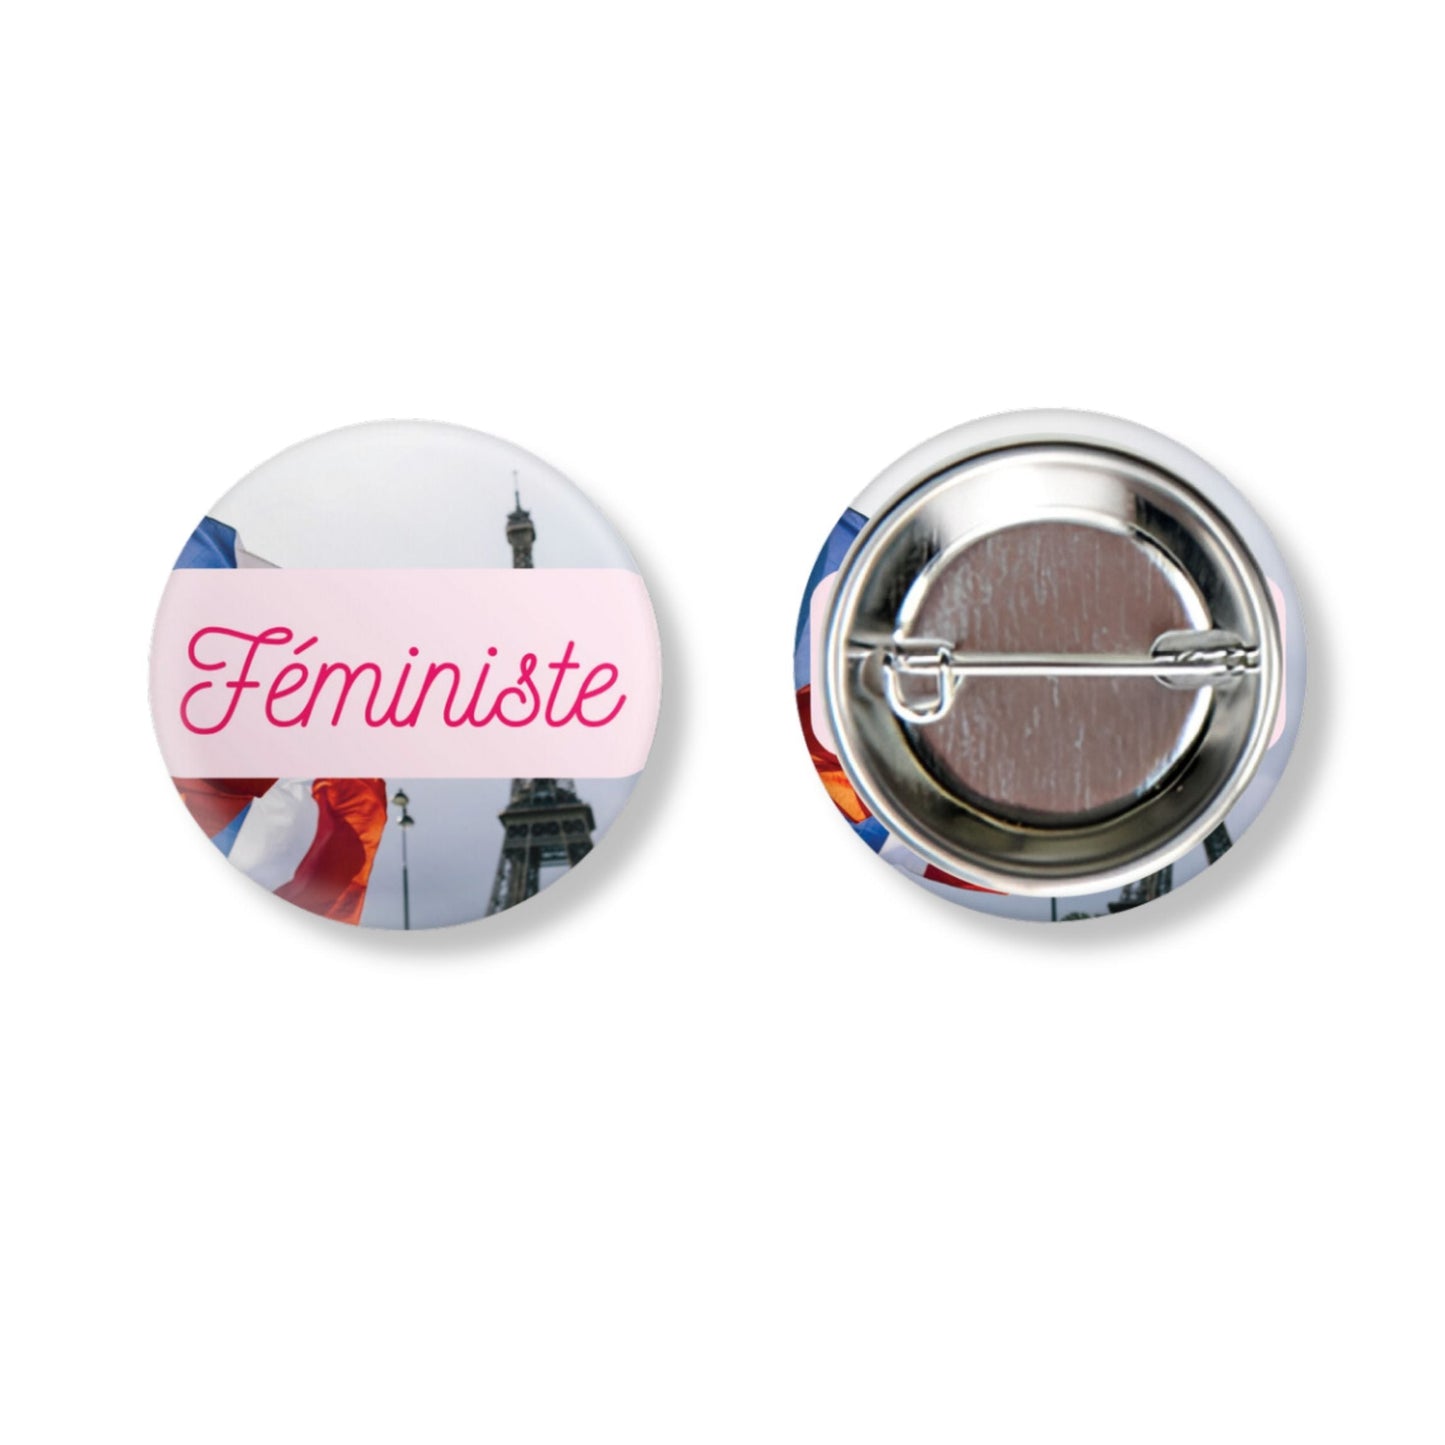 Féministe 1.25" Pinback Button | Feminist Pinback Badge with French Theme